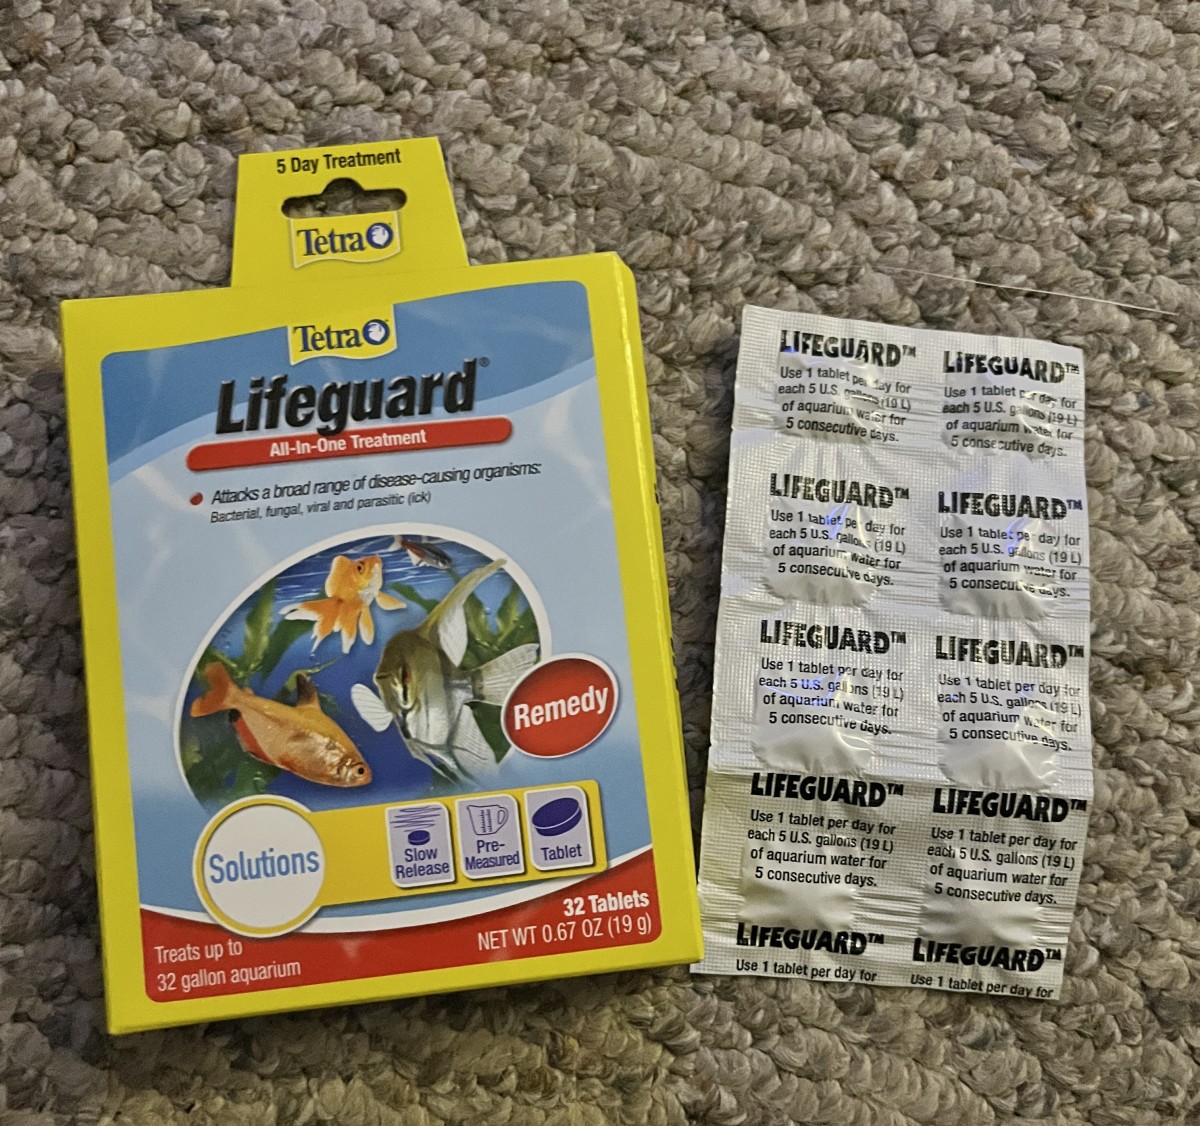 Tetra Lifeguard comes conveniently dosed in tablet form.  I found this medicine easy to use when treating my sick betta fish.